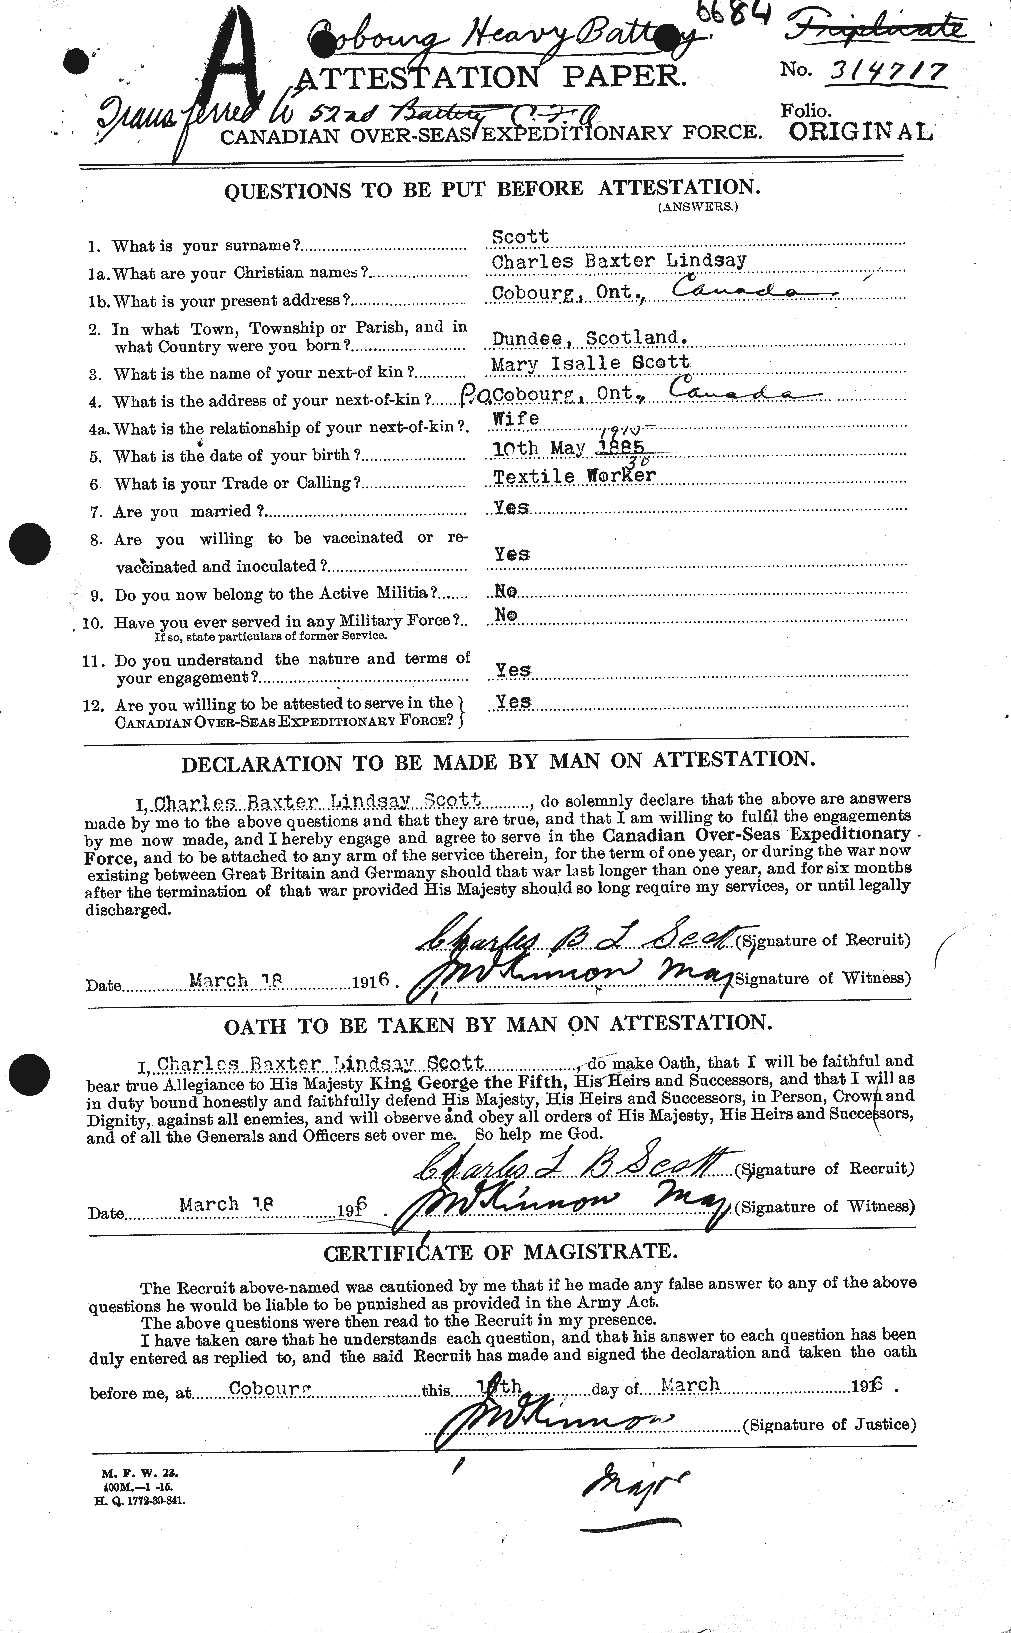 Personnel Records of the First World War - CEF 085904a